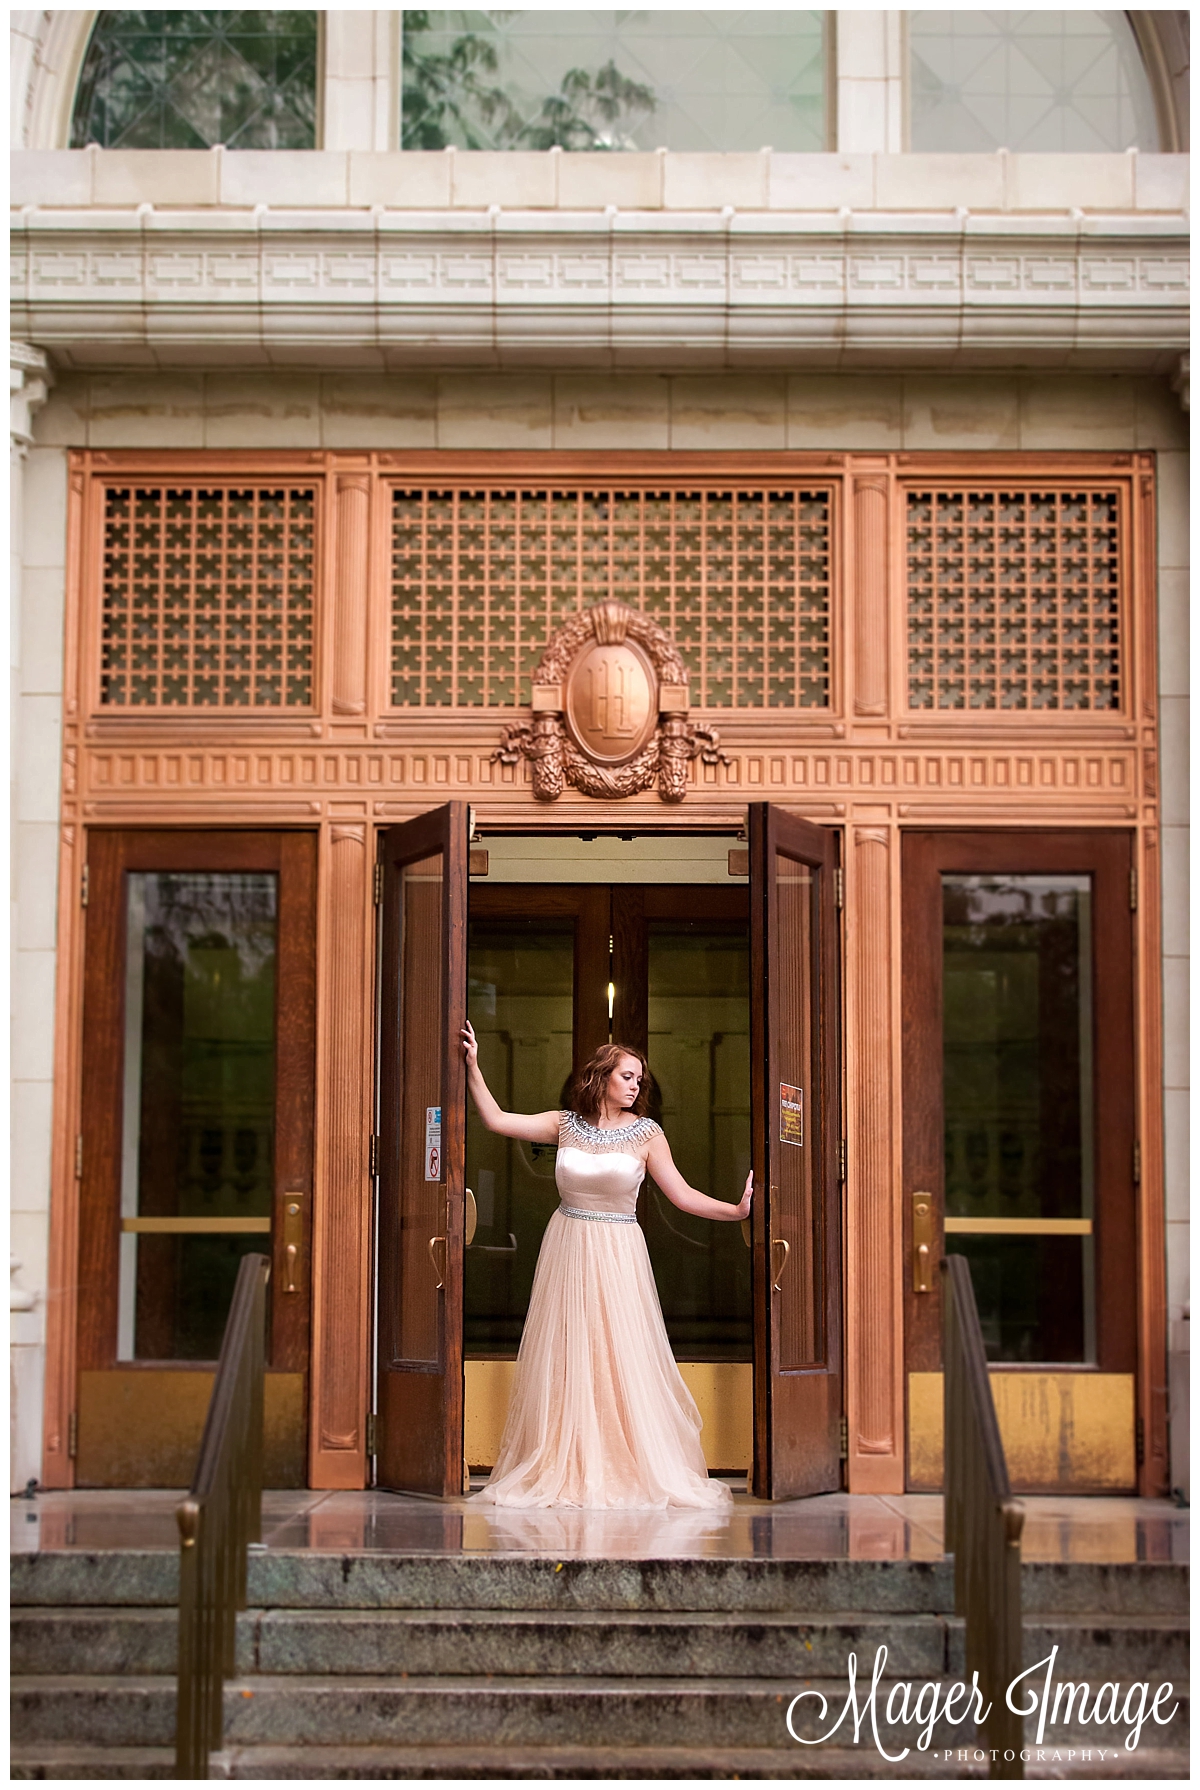 ballgown and gorgeous architecture with copper